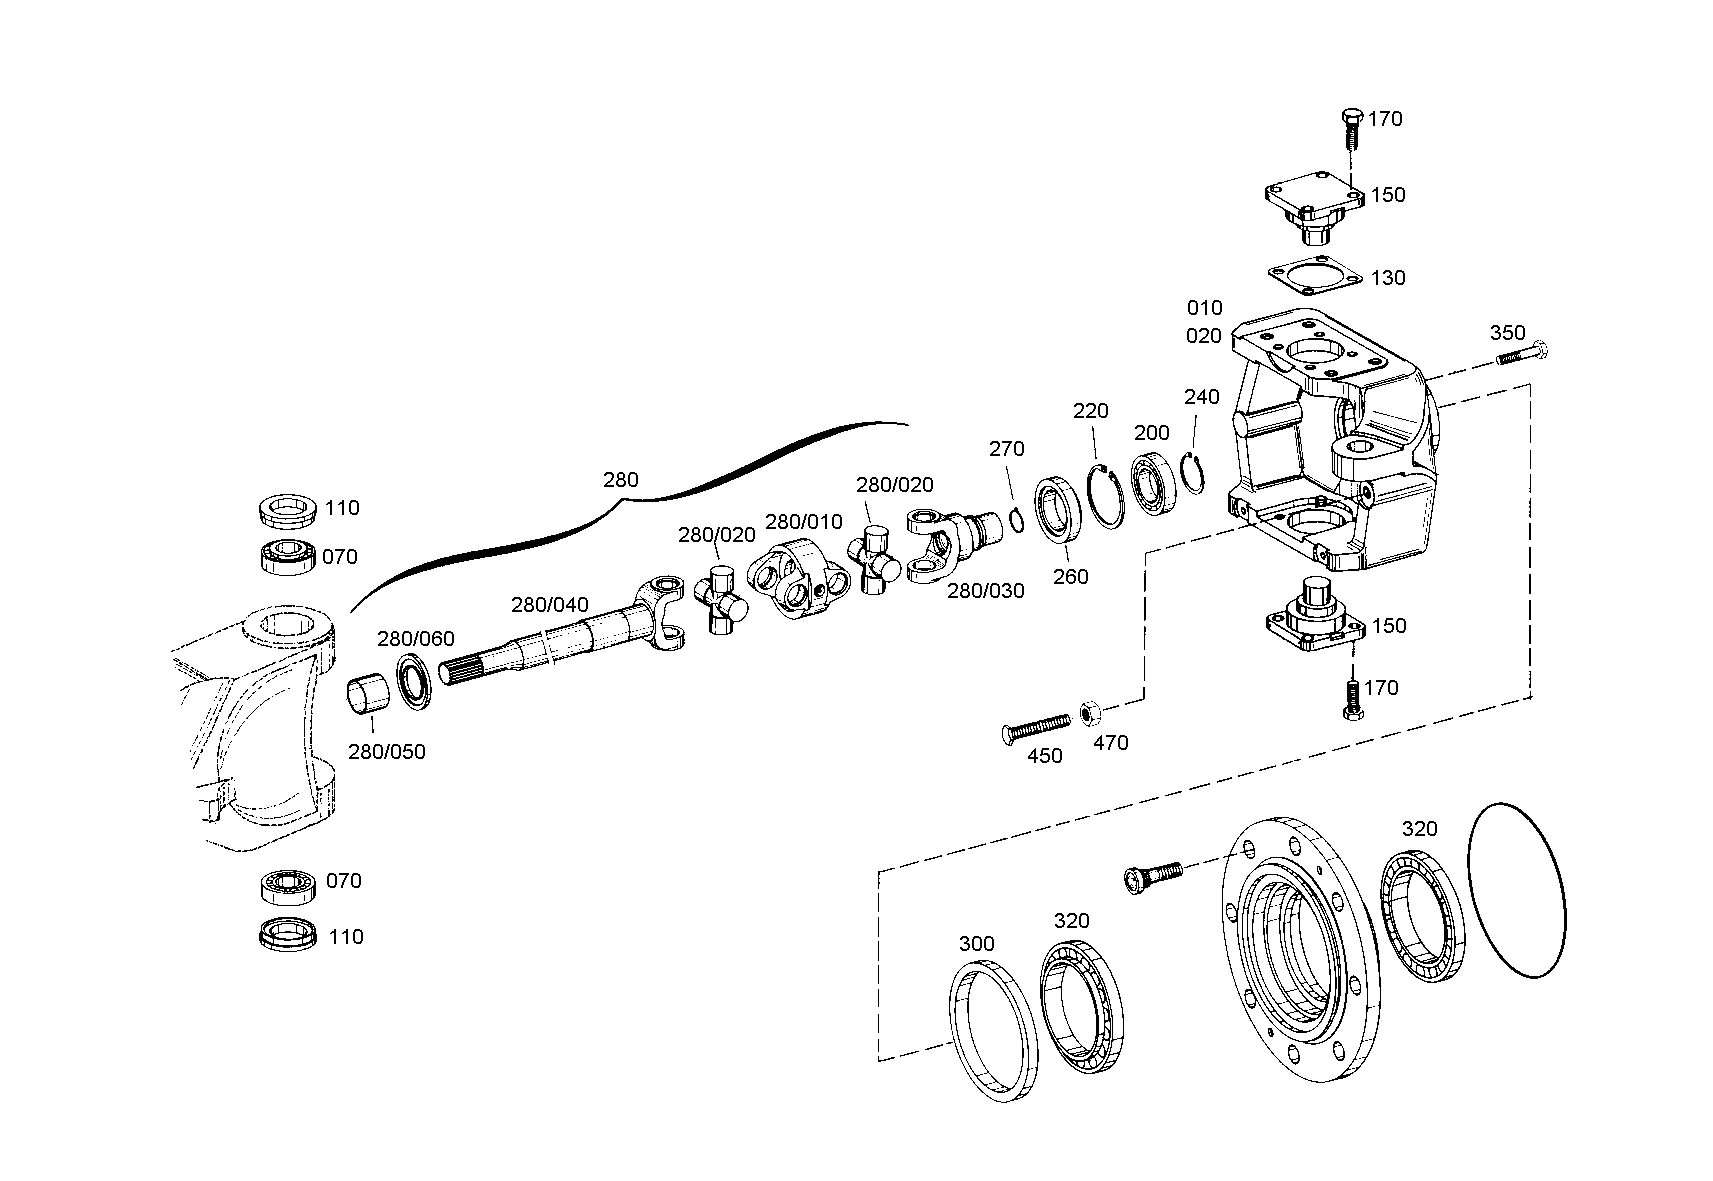 drawing for AGCO F510300020540 - SCREEN SHEET (figure 3)